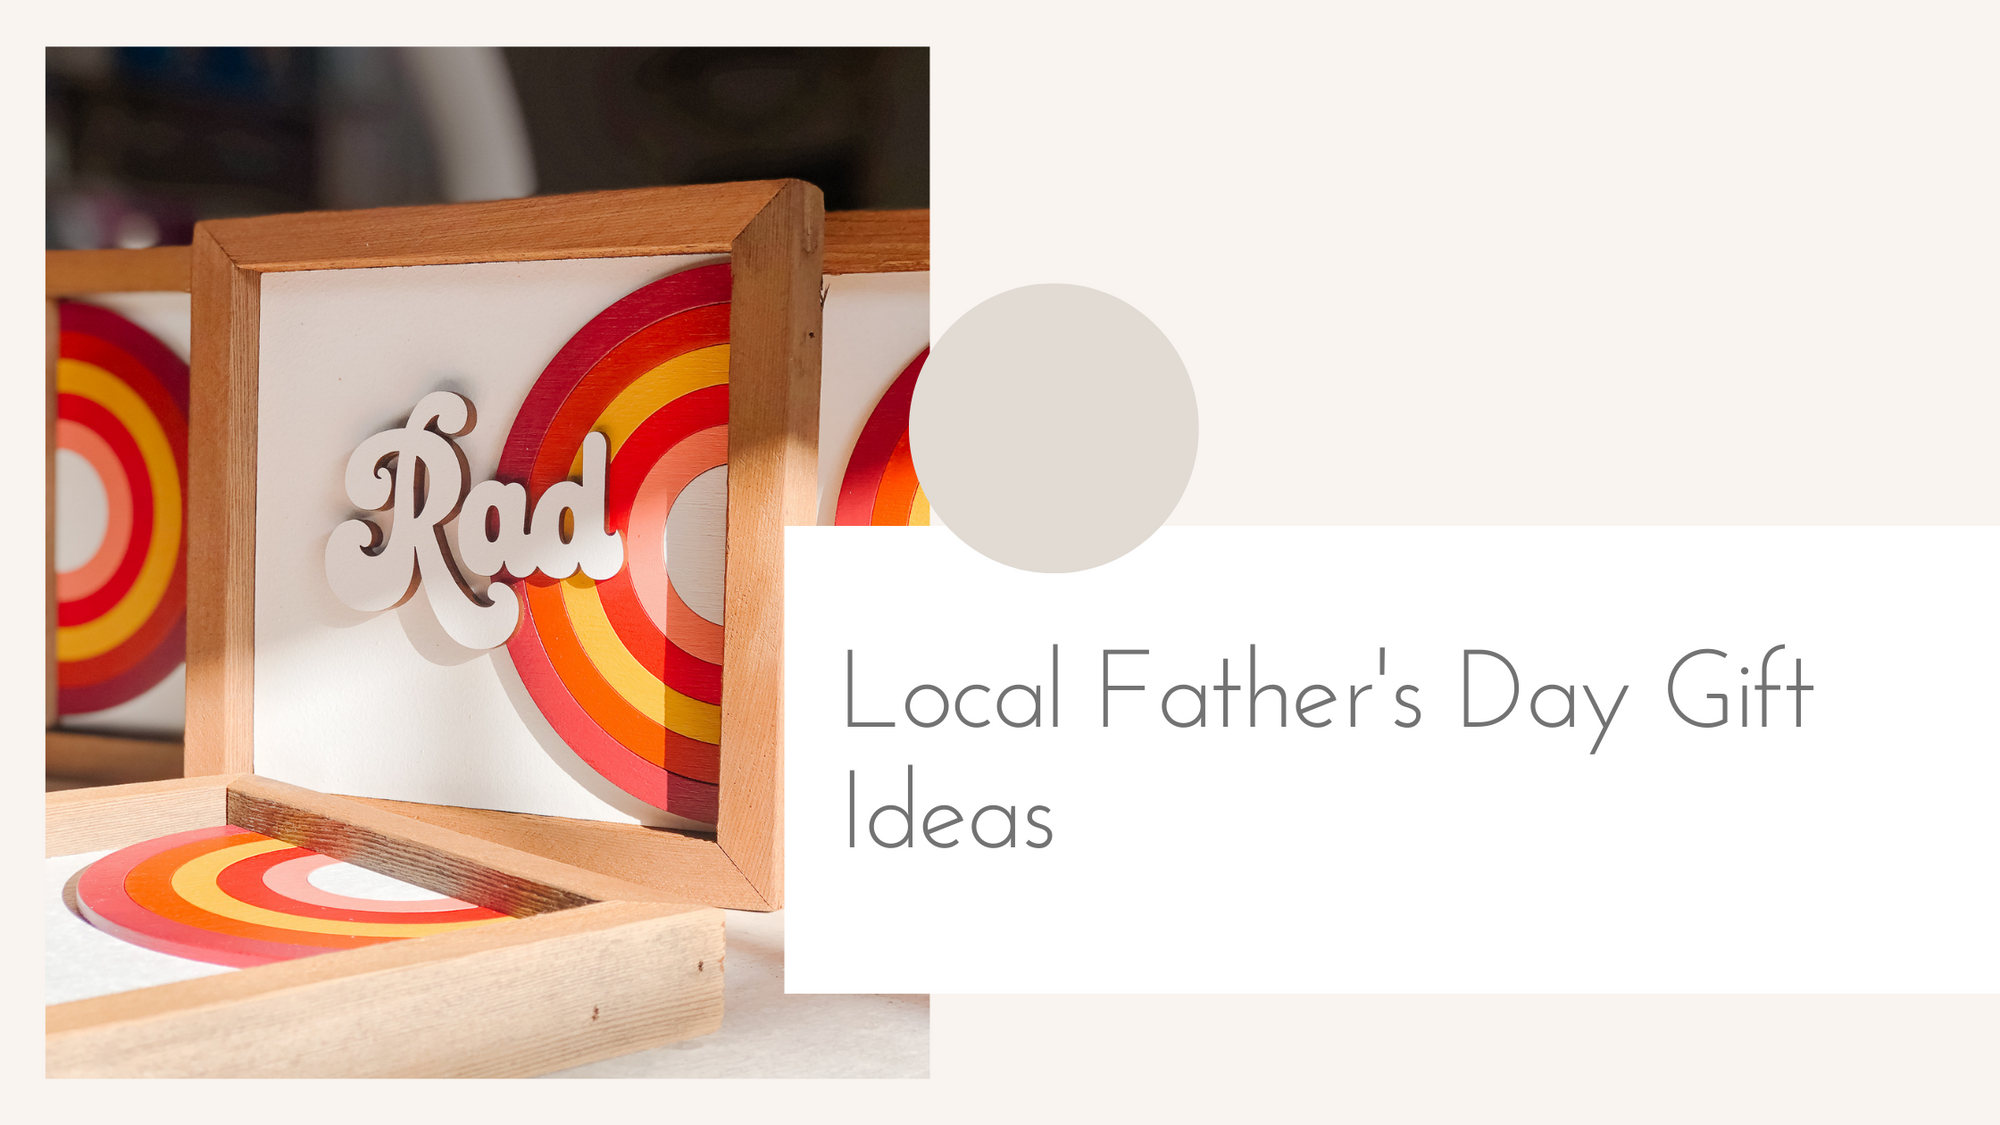 Local Father's Day Gift Ideas